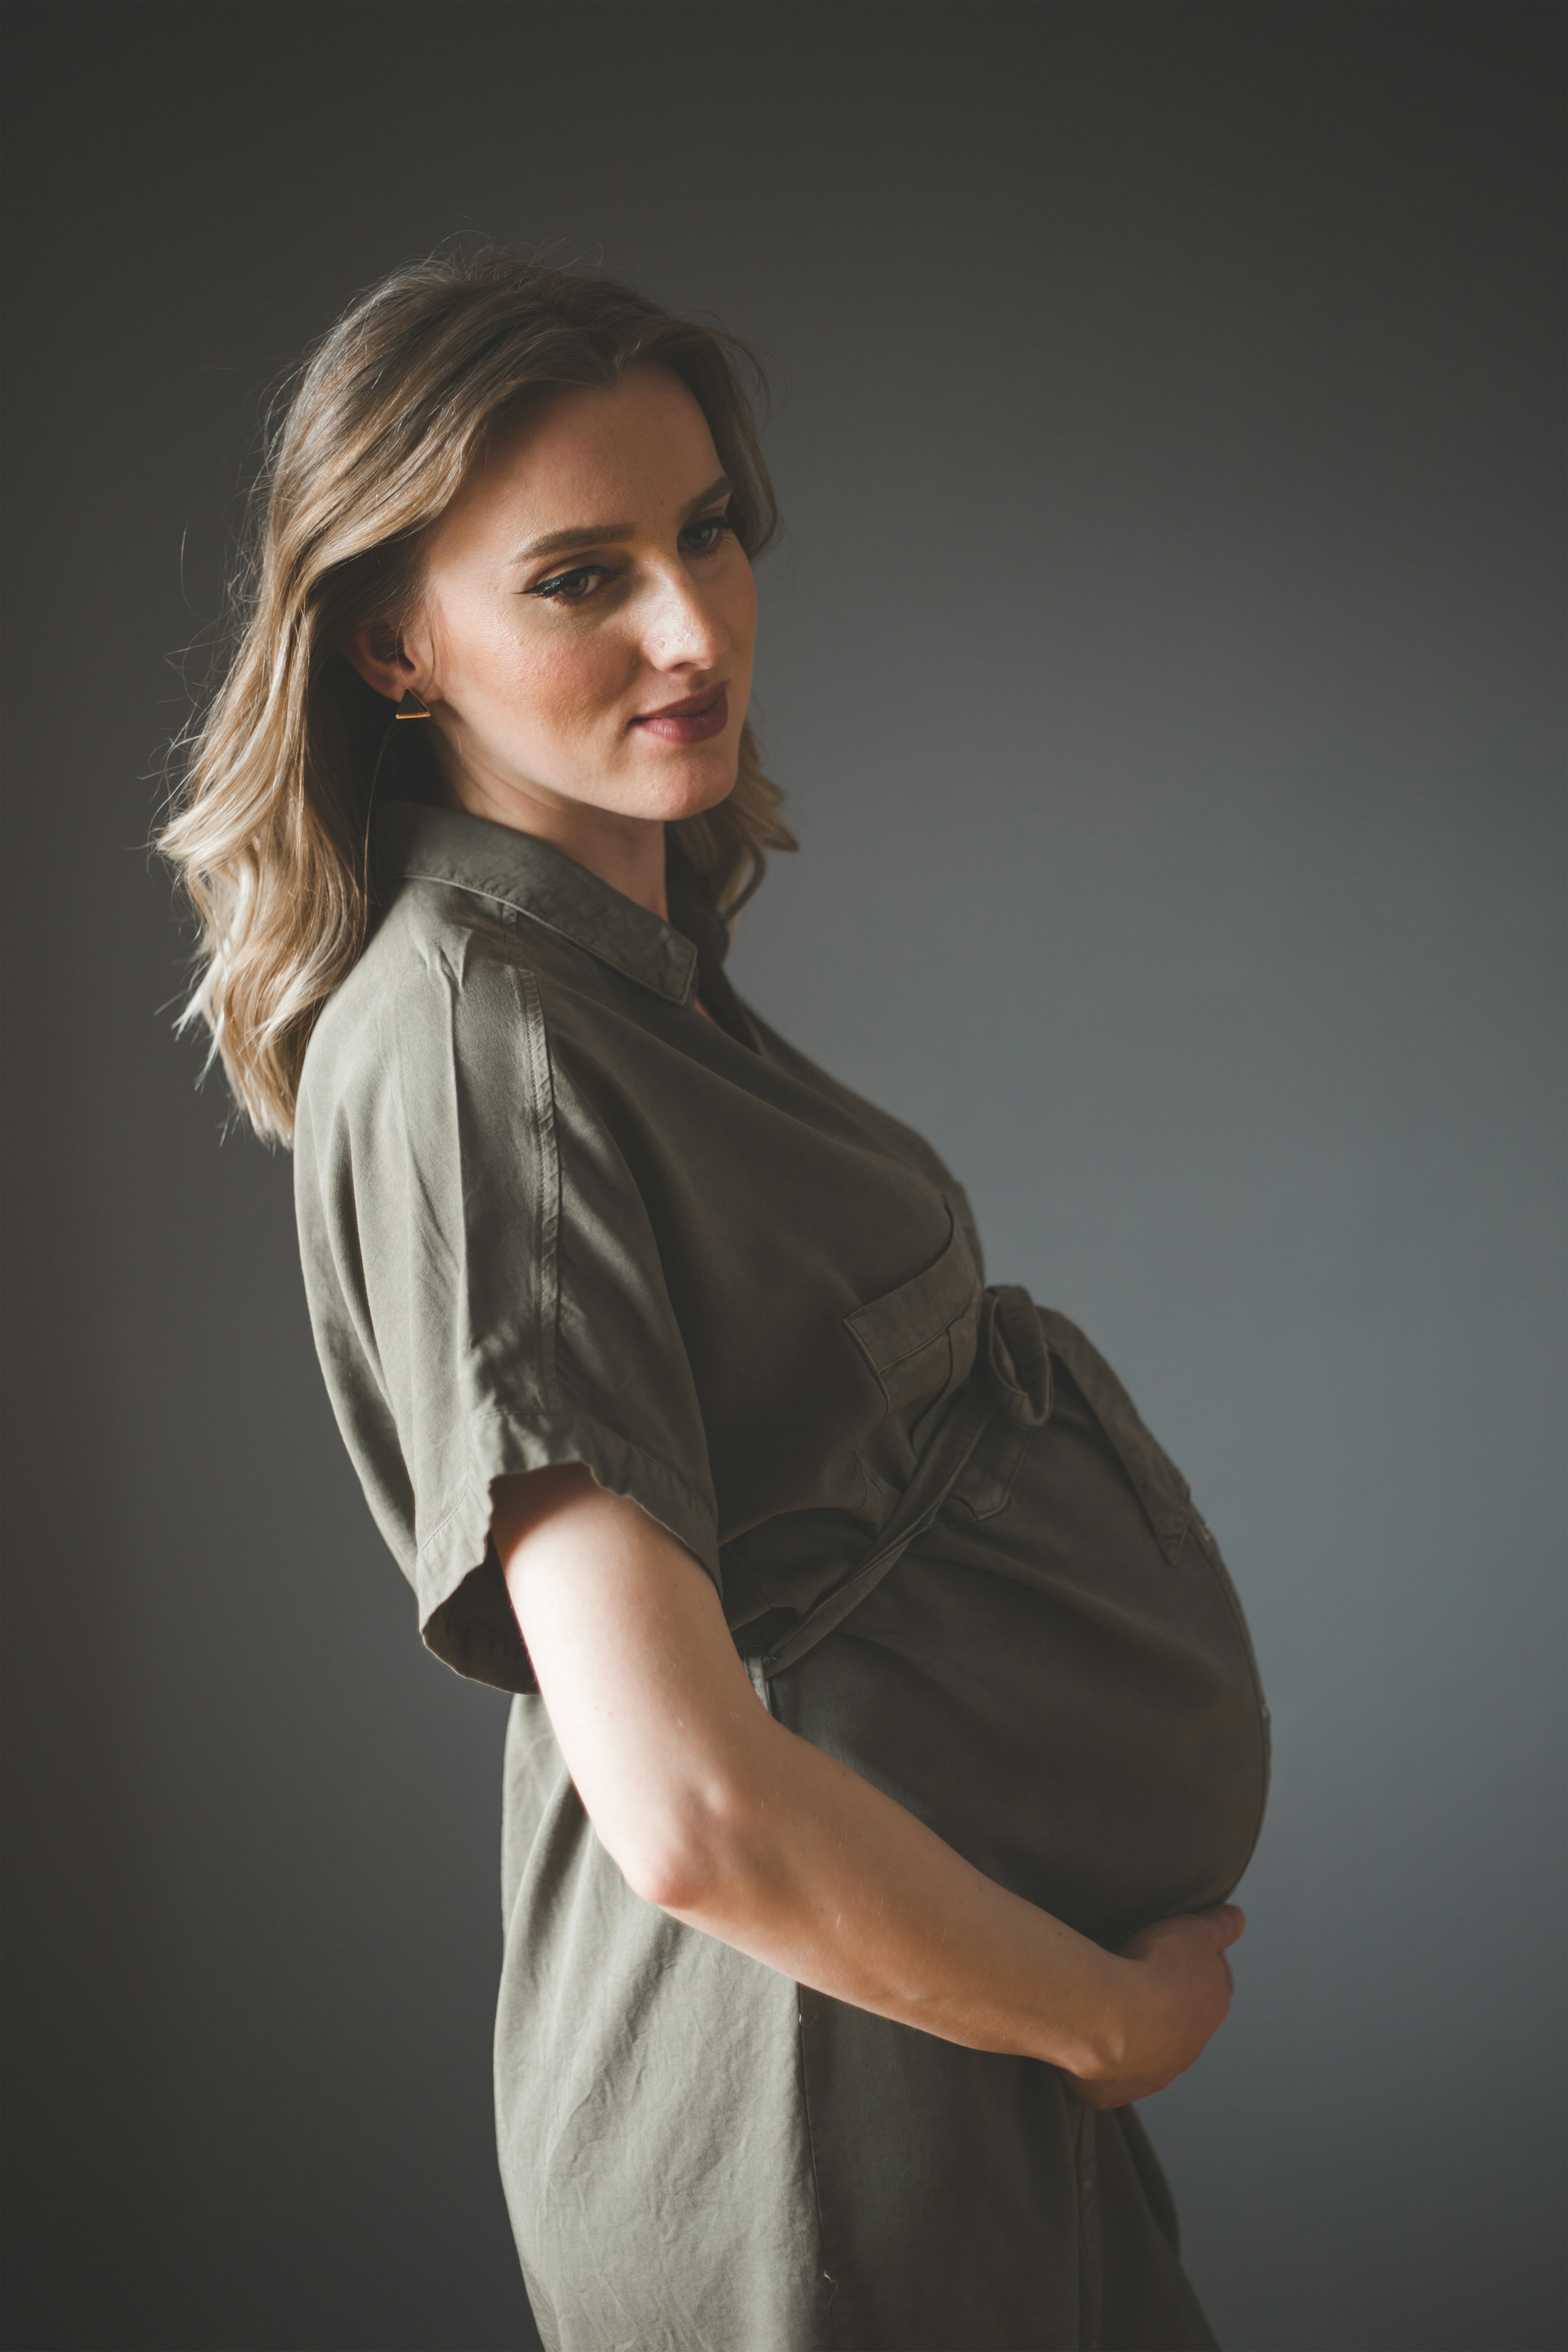 A pregnant woman holding her belly | Source: Unsplash